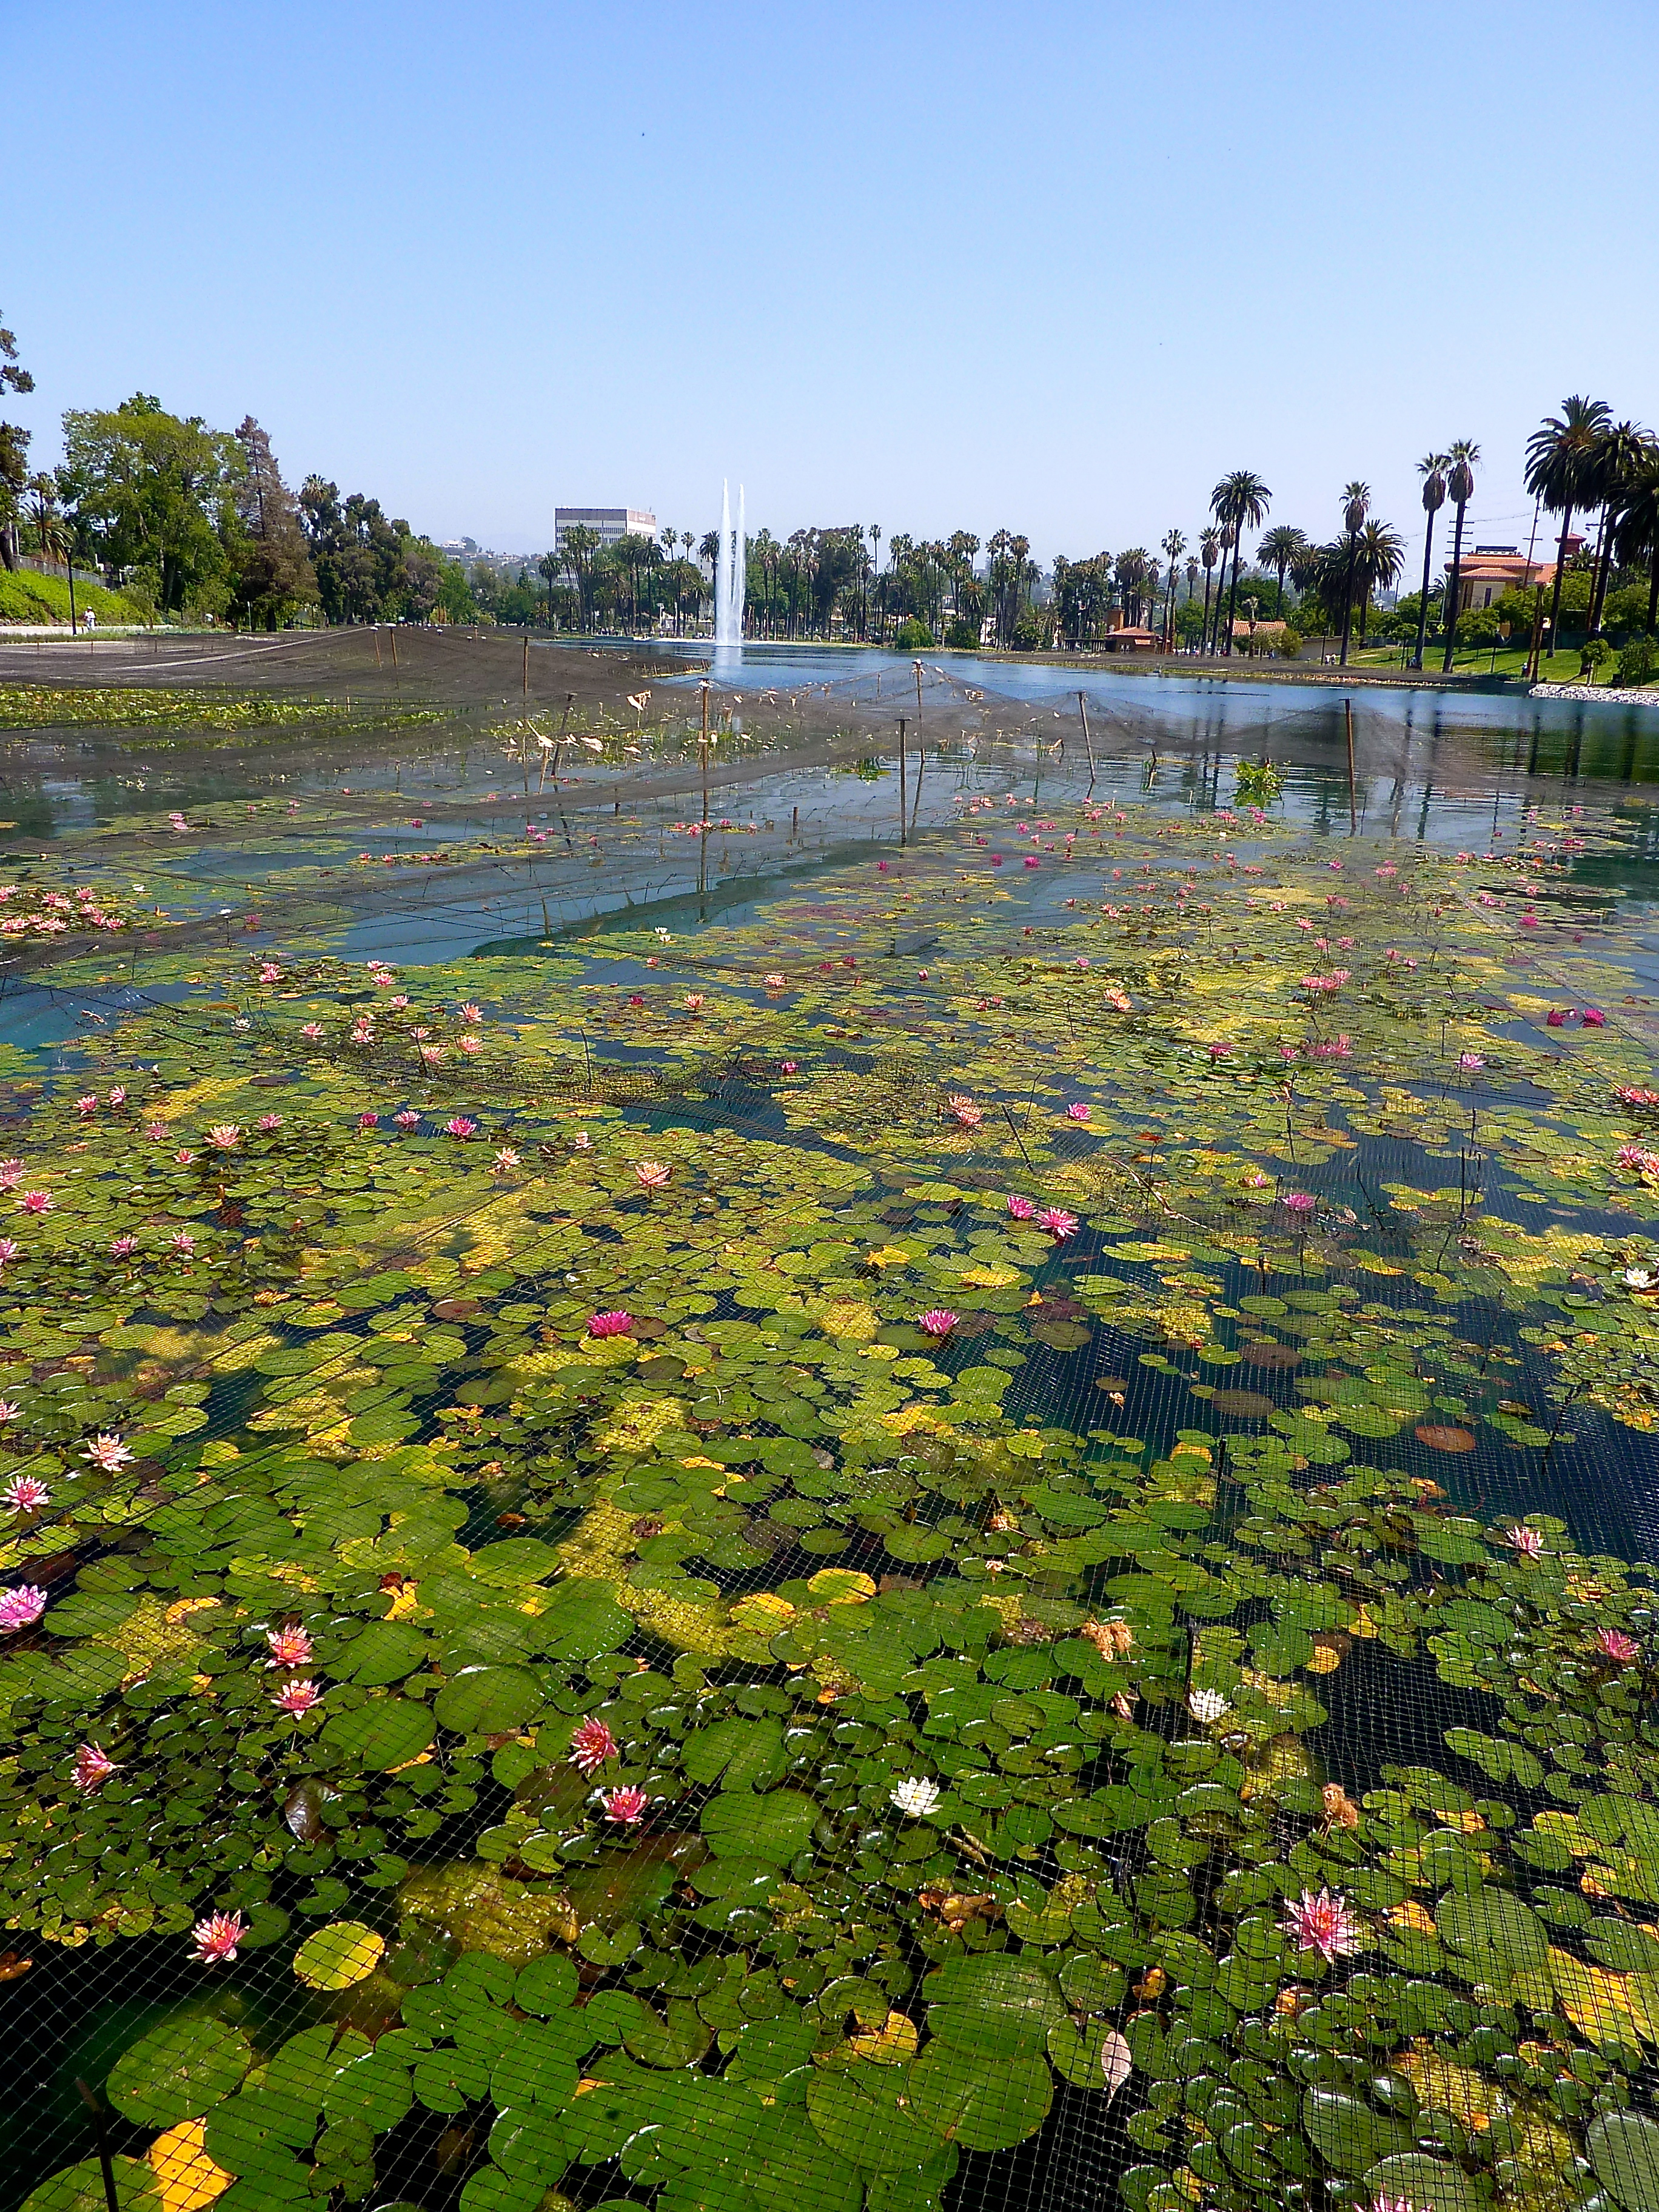 Offbeat L.A.: Echo Park Lake – The History of One of L.A.'s Oldest Parks